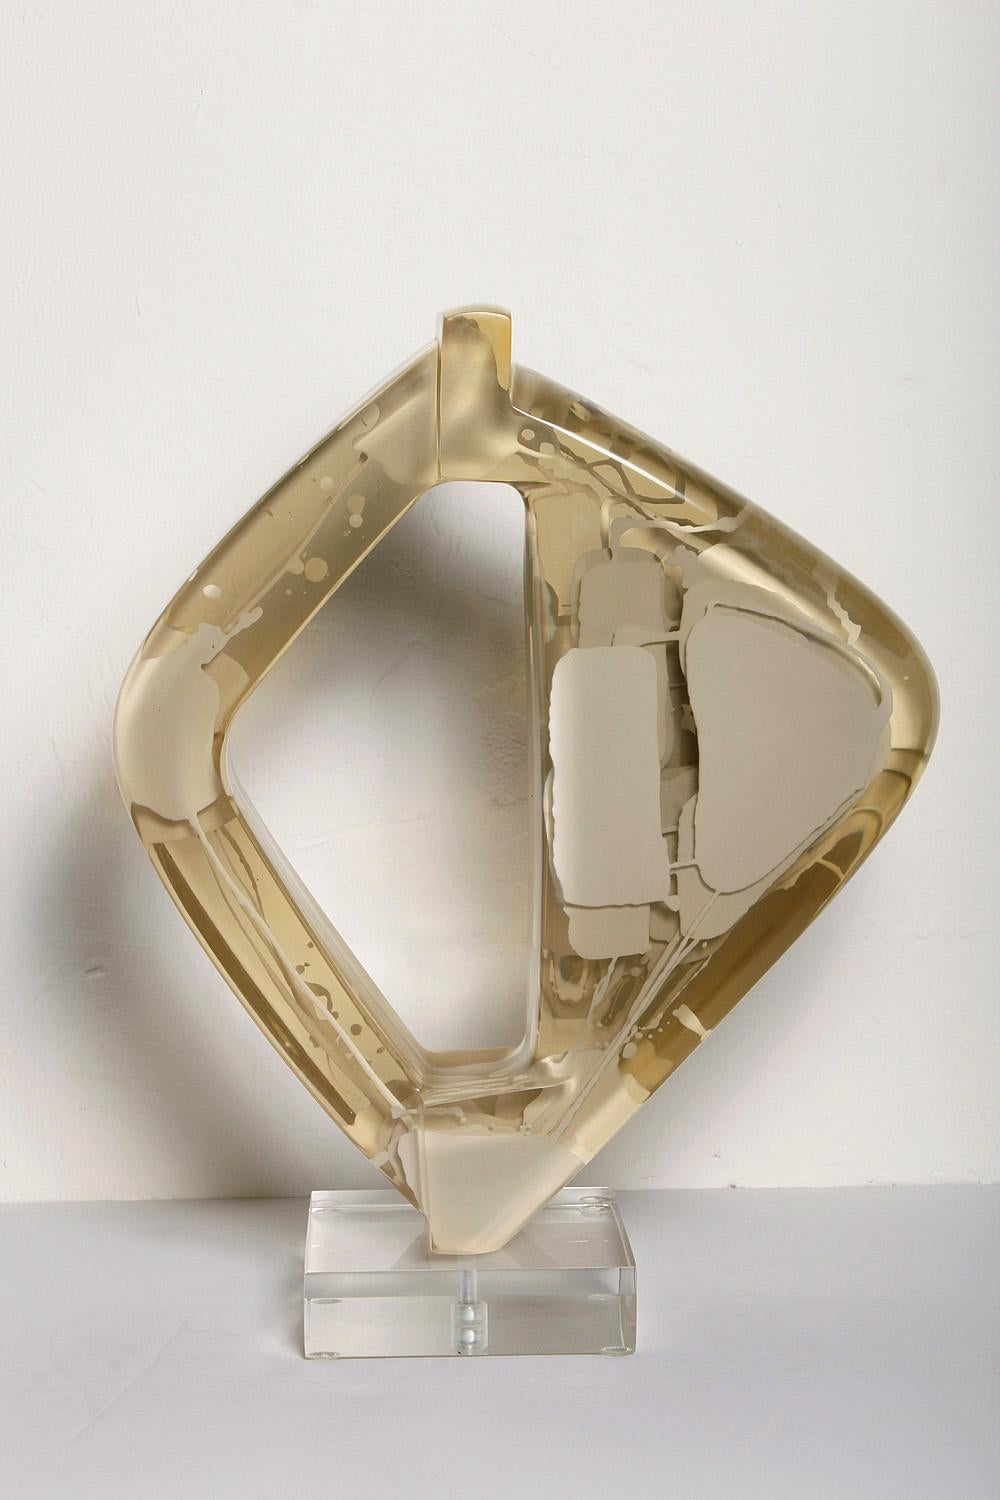 1978 acrylic polymer and resin sculpture by Salvatore Zagami (American, 1953 -). Signed and dated [Zagami 78].